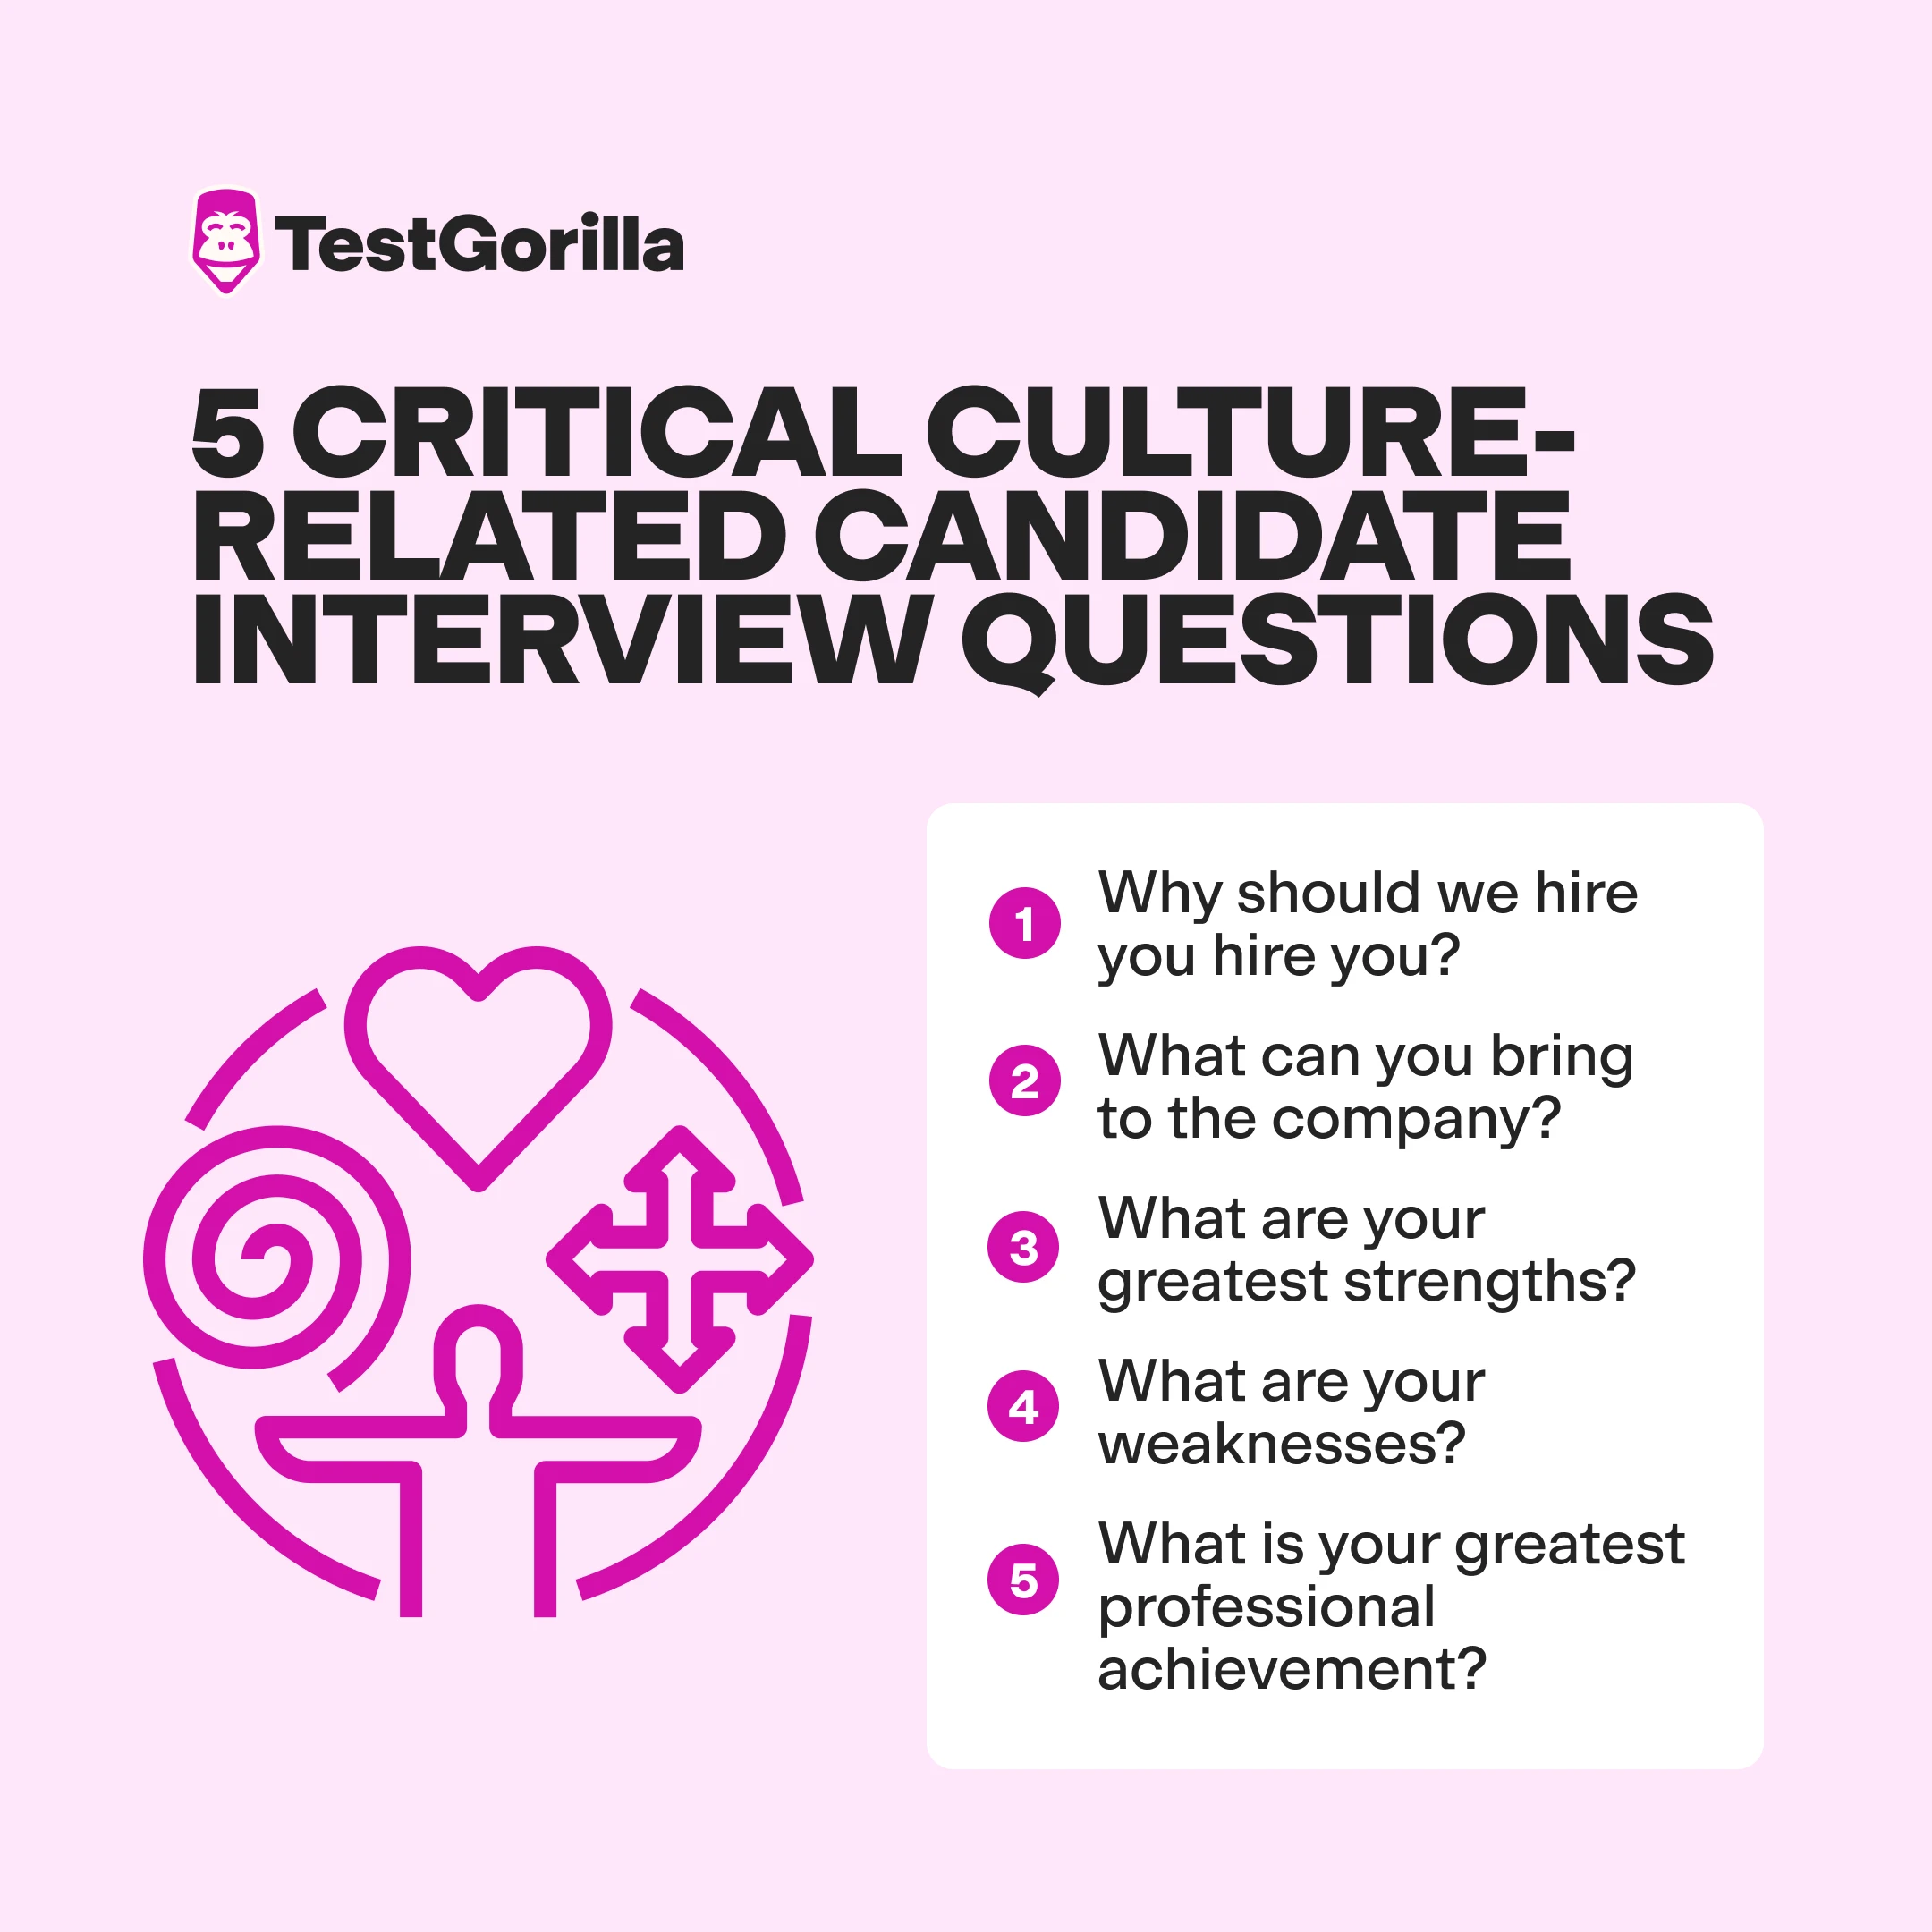 5 critical culture-related candidate interview questions
